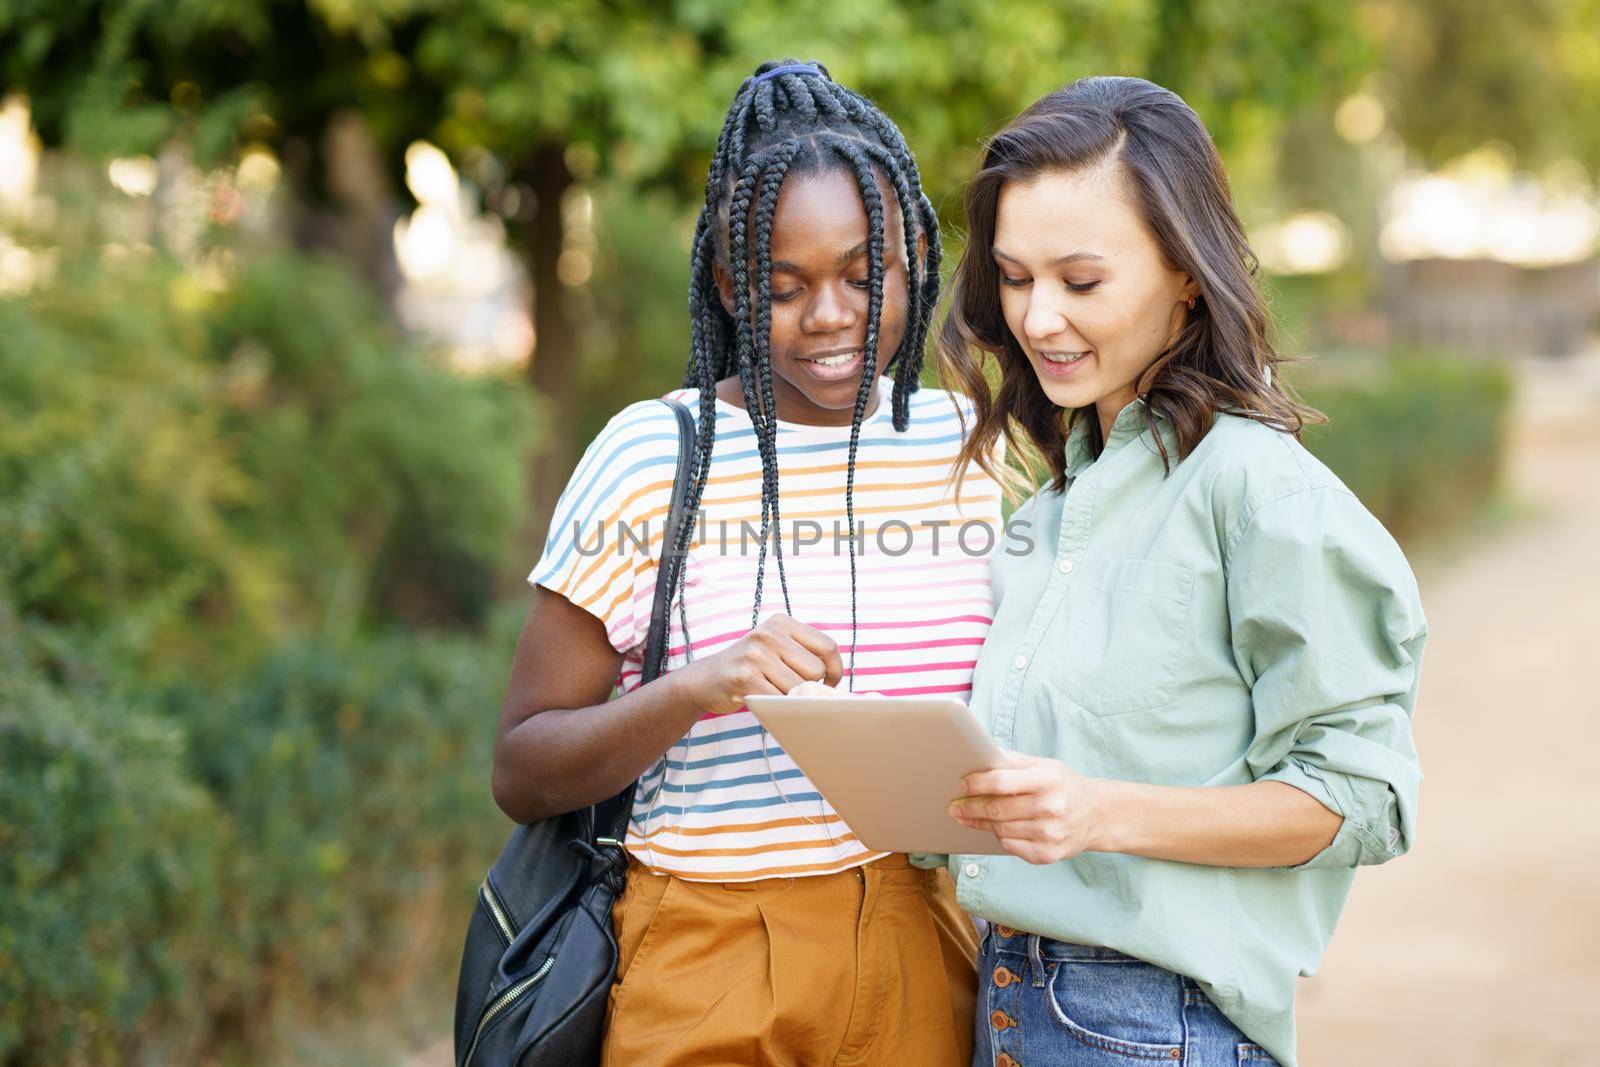 Two multiethnic women consulting something on a digital tablet outdoors.